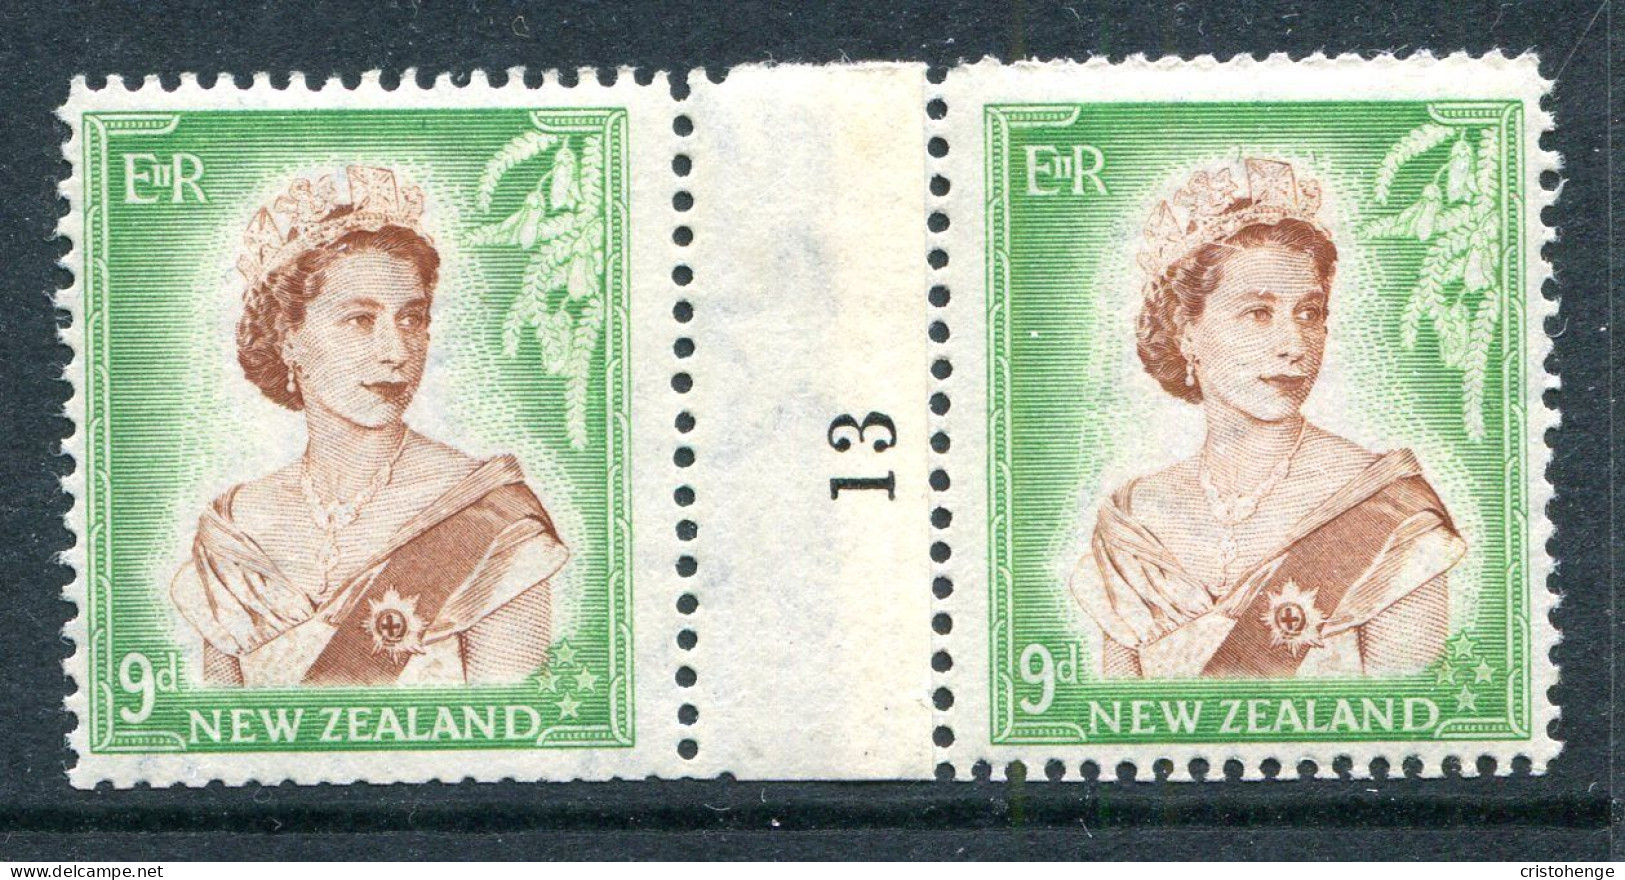 New Zealand 1953-59 QEII Definitives - Coil Pairs - 9d Brown & Green - Horizontal - No. 13 - LHM - Neufs